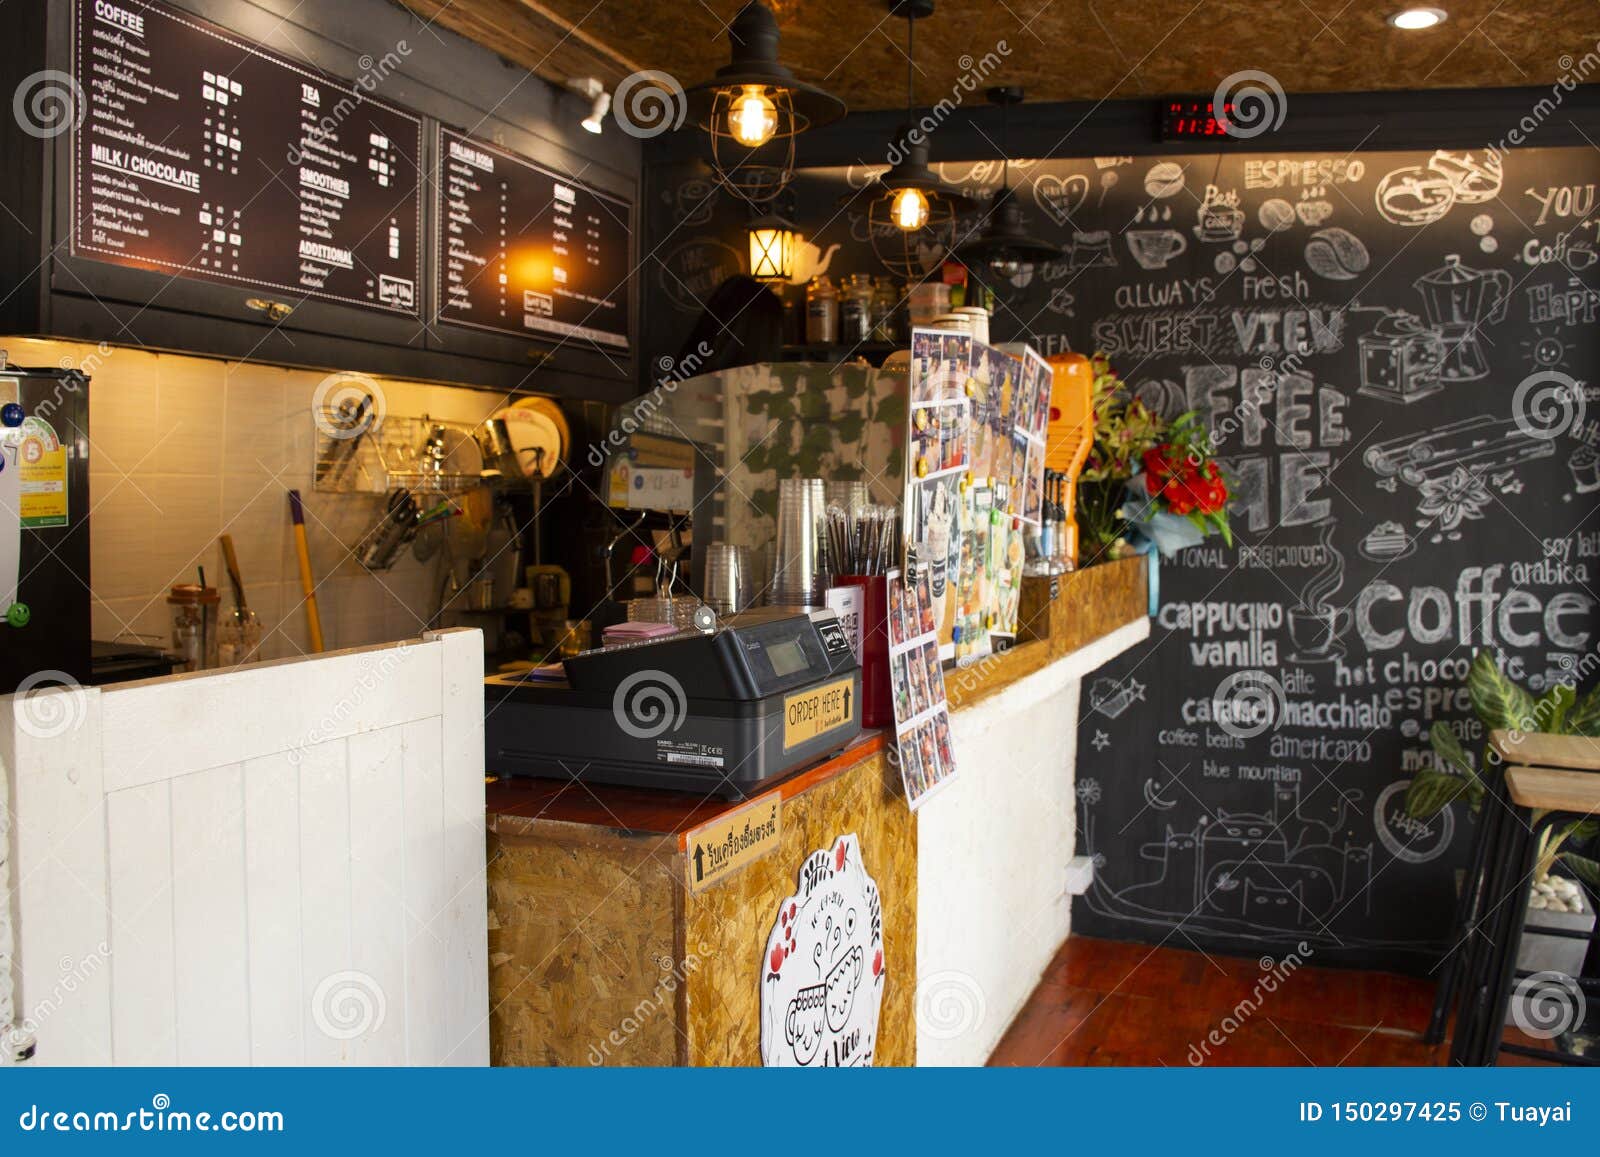 Decoration Furniture and Interior Design of Local Coffee Shop for ...